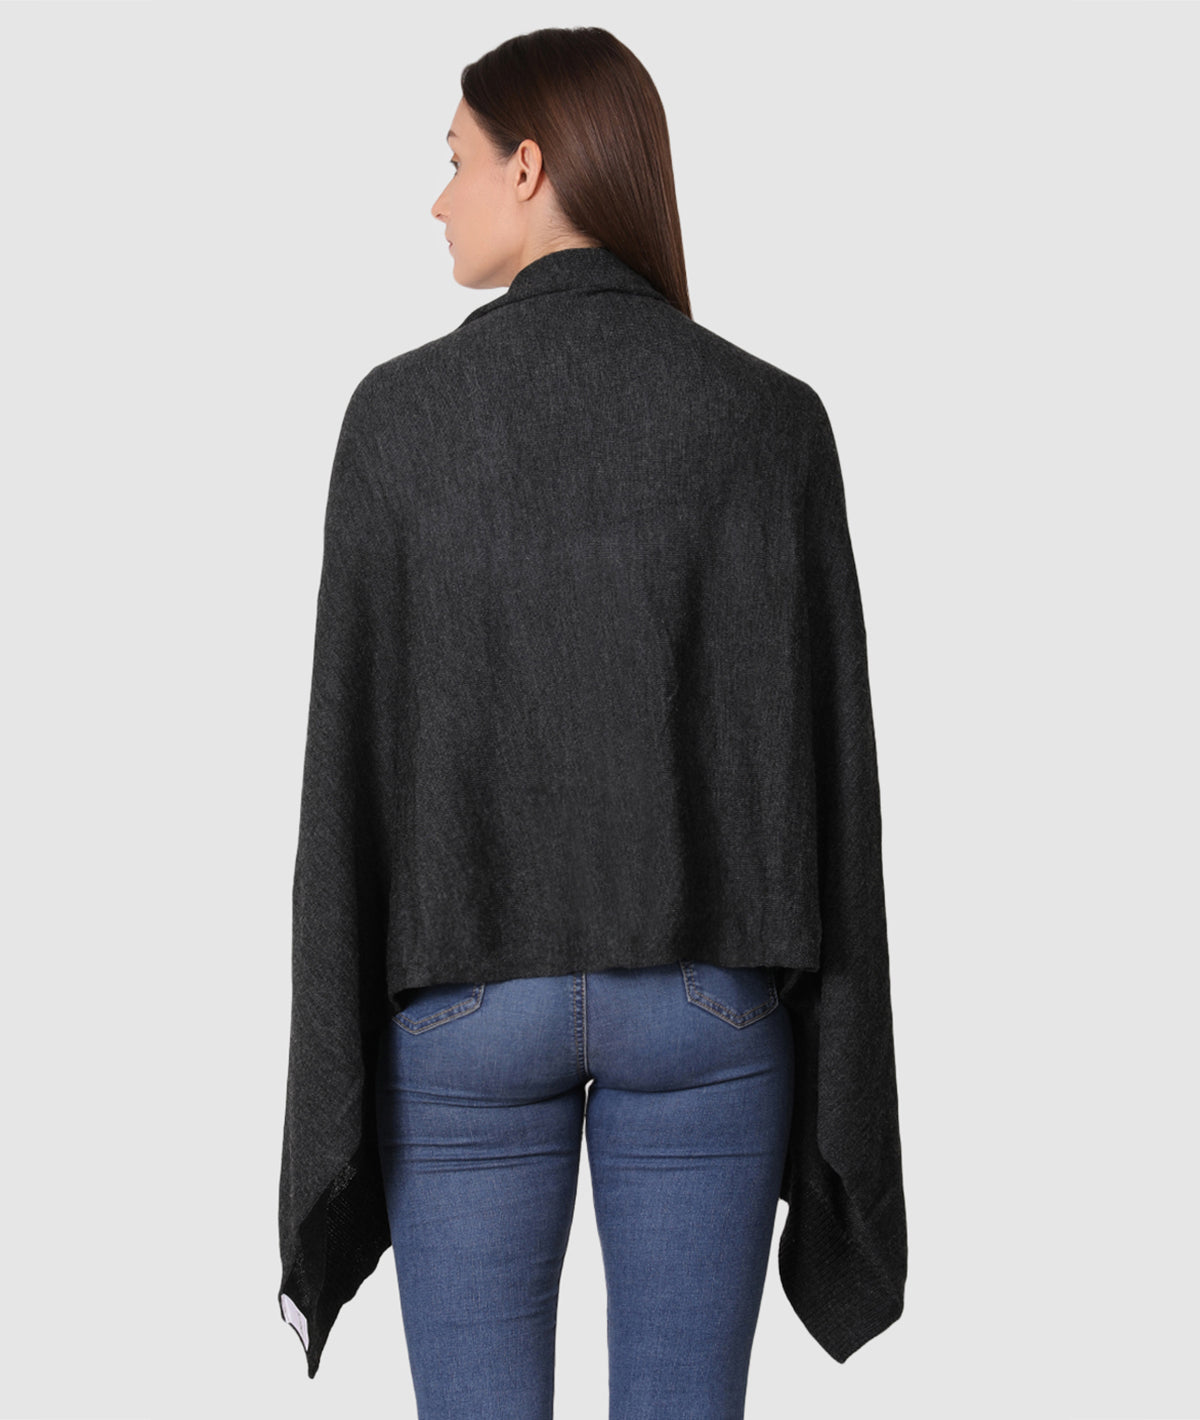 Palma Merino Wool Knitted Fashion Poncho / Cape for Everyday Chic Look (One Size Fits All) (Charcoal)